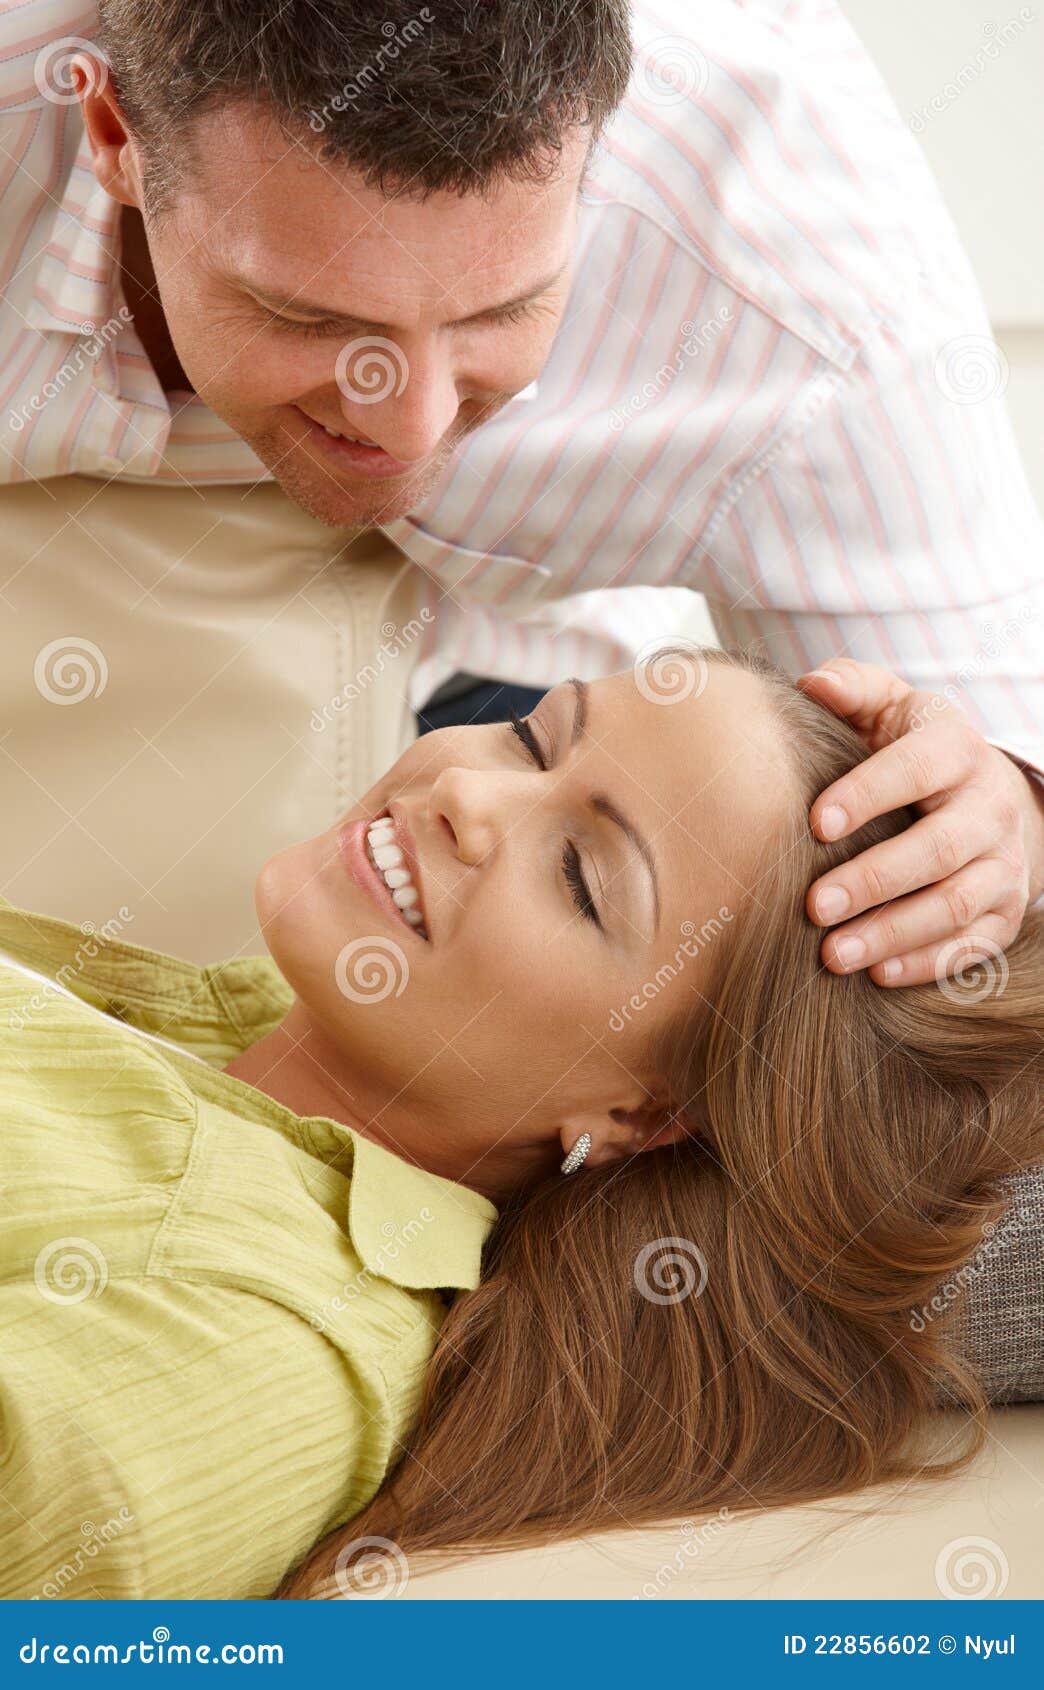 Man stroking woman s hair stock photo. Image of cheerful - 22856602